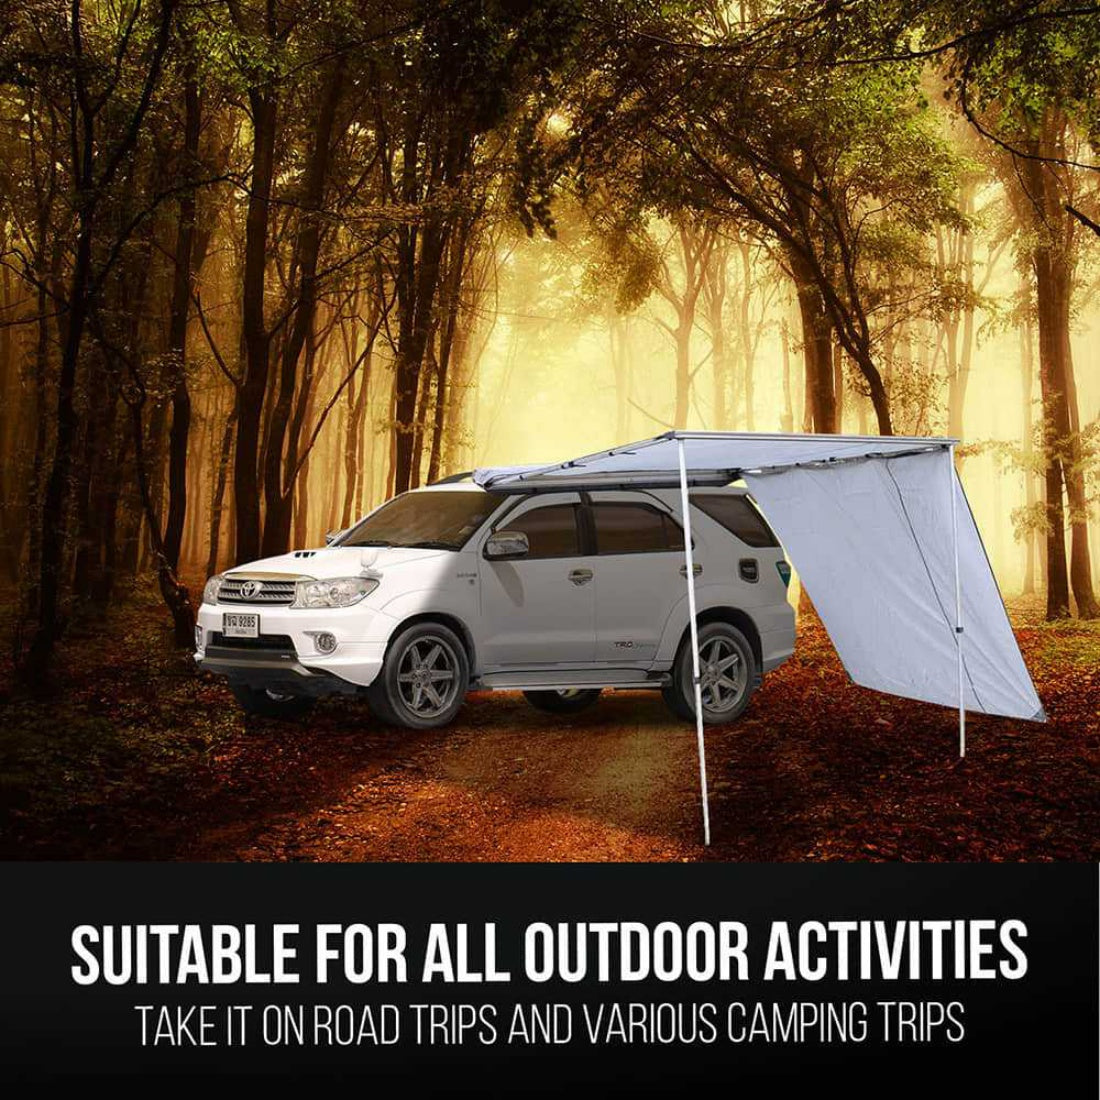 New Awning Roof Tent 2m x 3m + Extension 2m x 2m Camping Trailer 4WD Car Rack